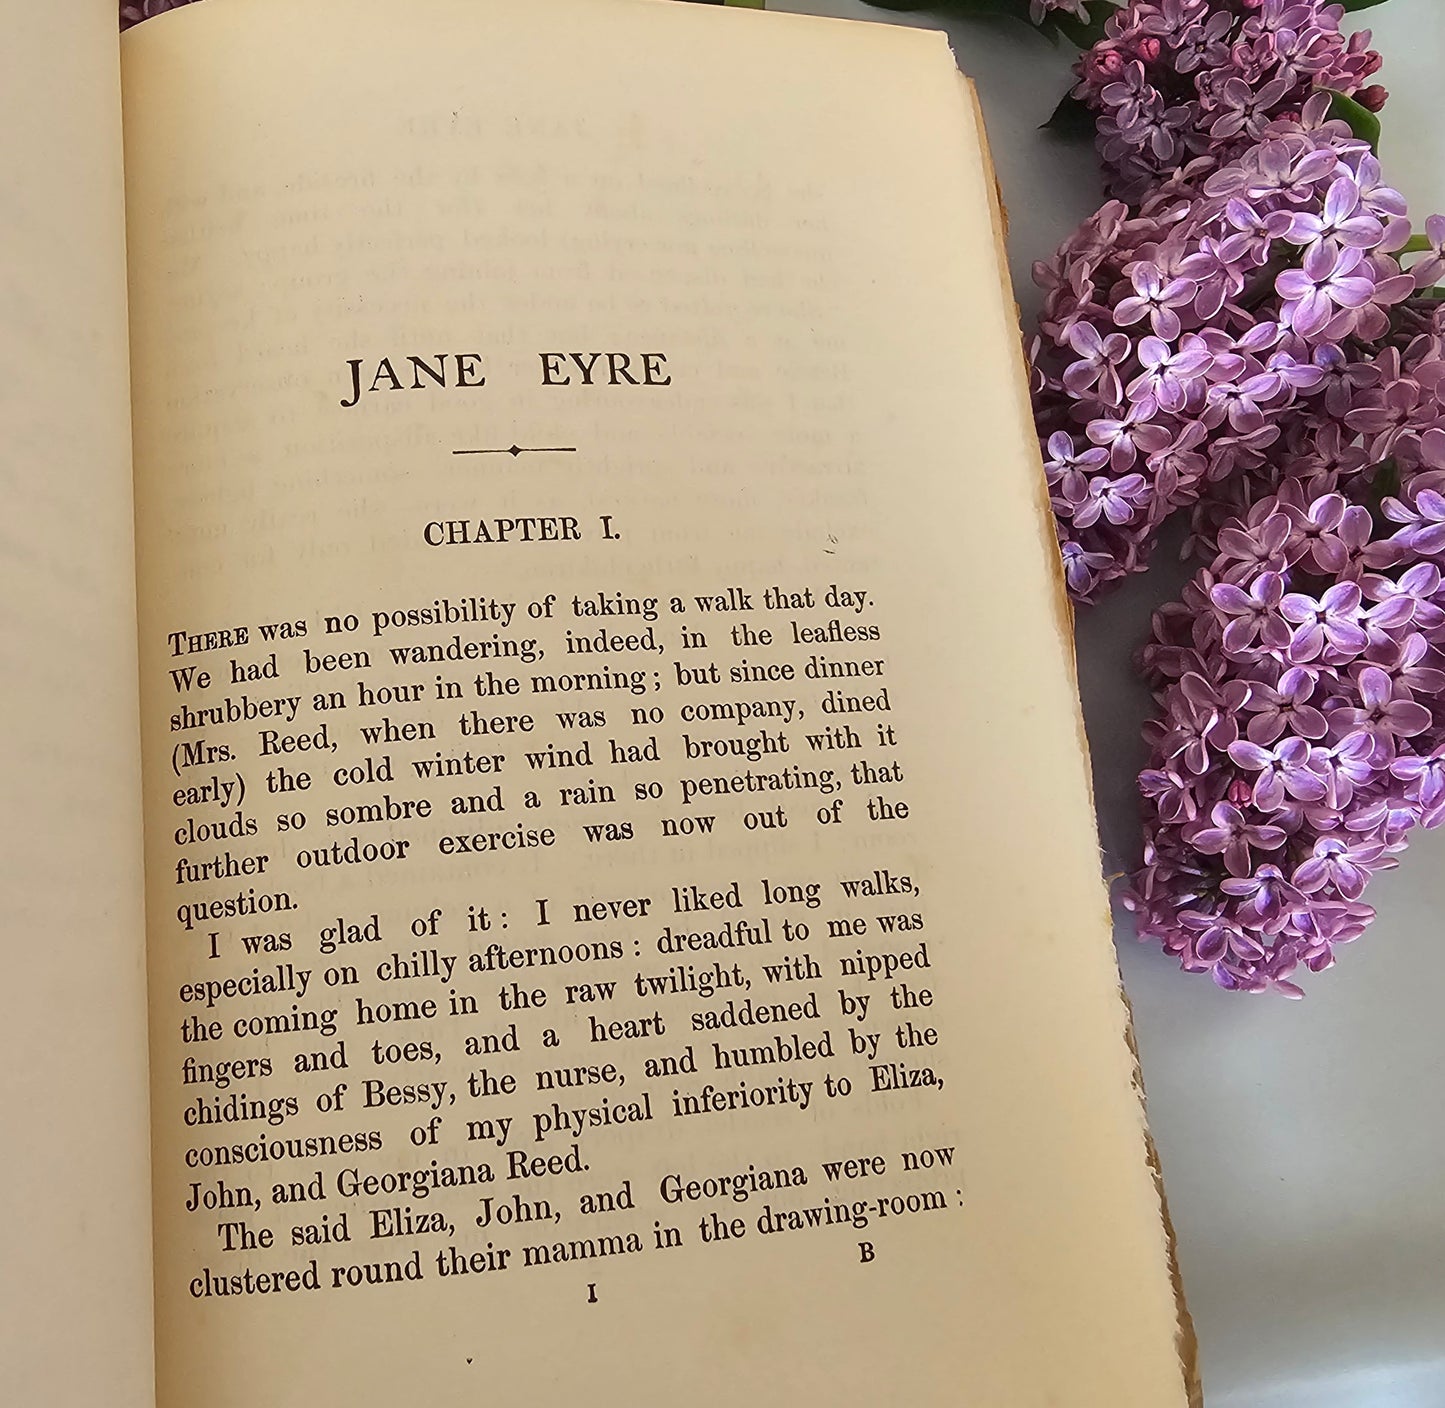 1907 Jane Eyre by Charlotte Bronte in Two Volumes / John Grant, Edinburgh / Thornton Ed. / Lovely Antique Bronte Book / Very Good Condition